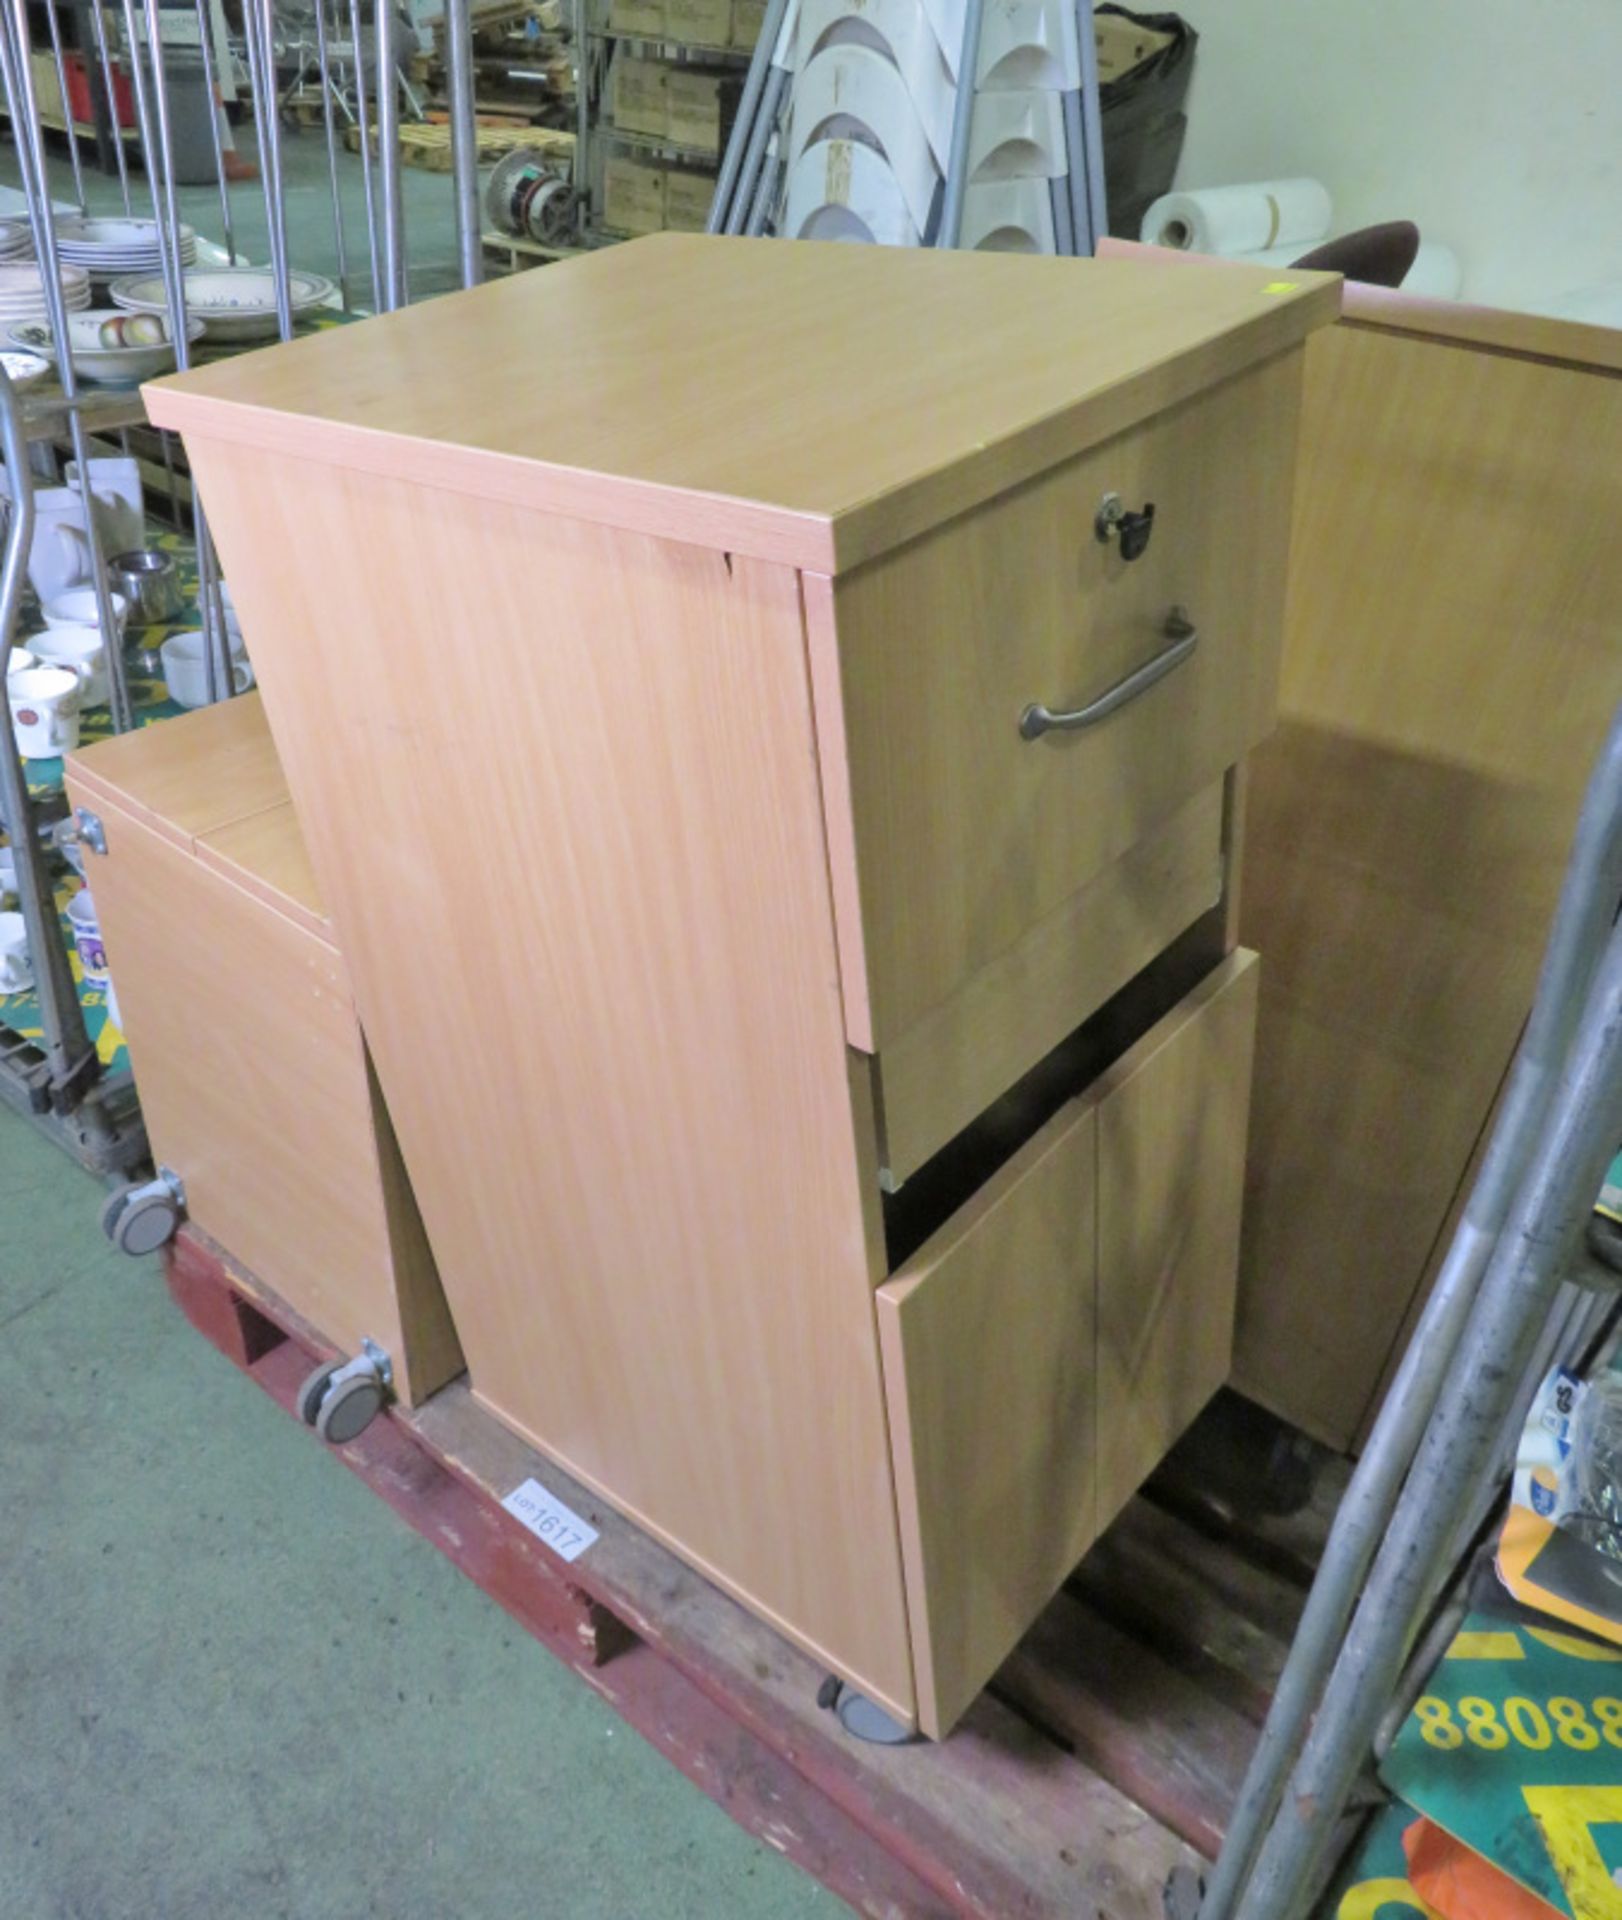 3x Bed Side Cabinets - W 450mm x D 550mm x H 980mm - missing castors - Image 5 of 5